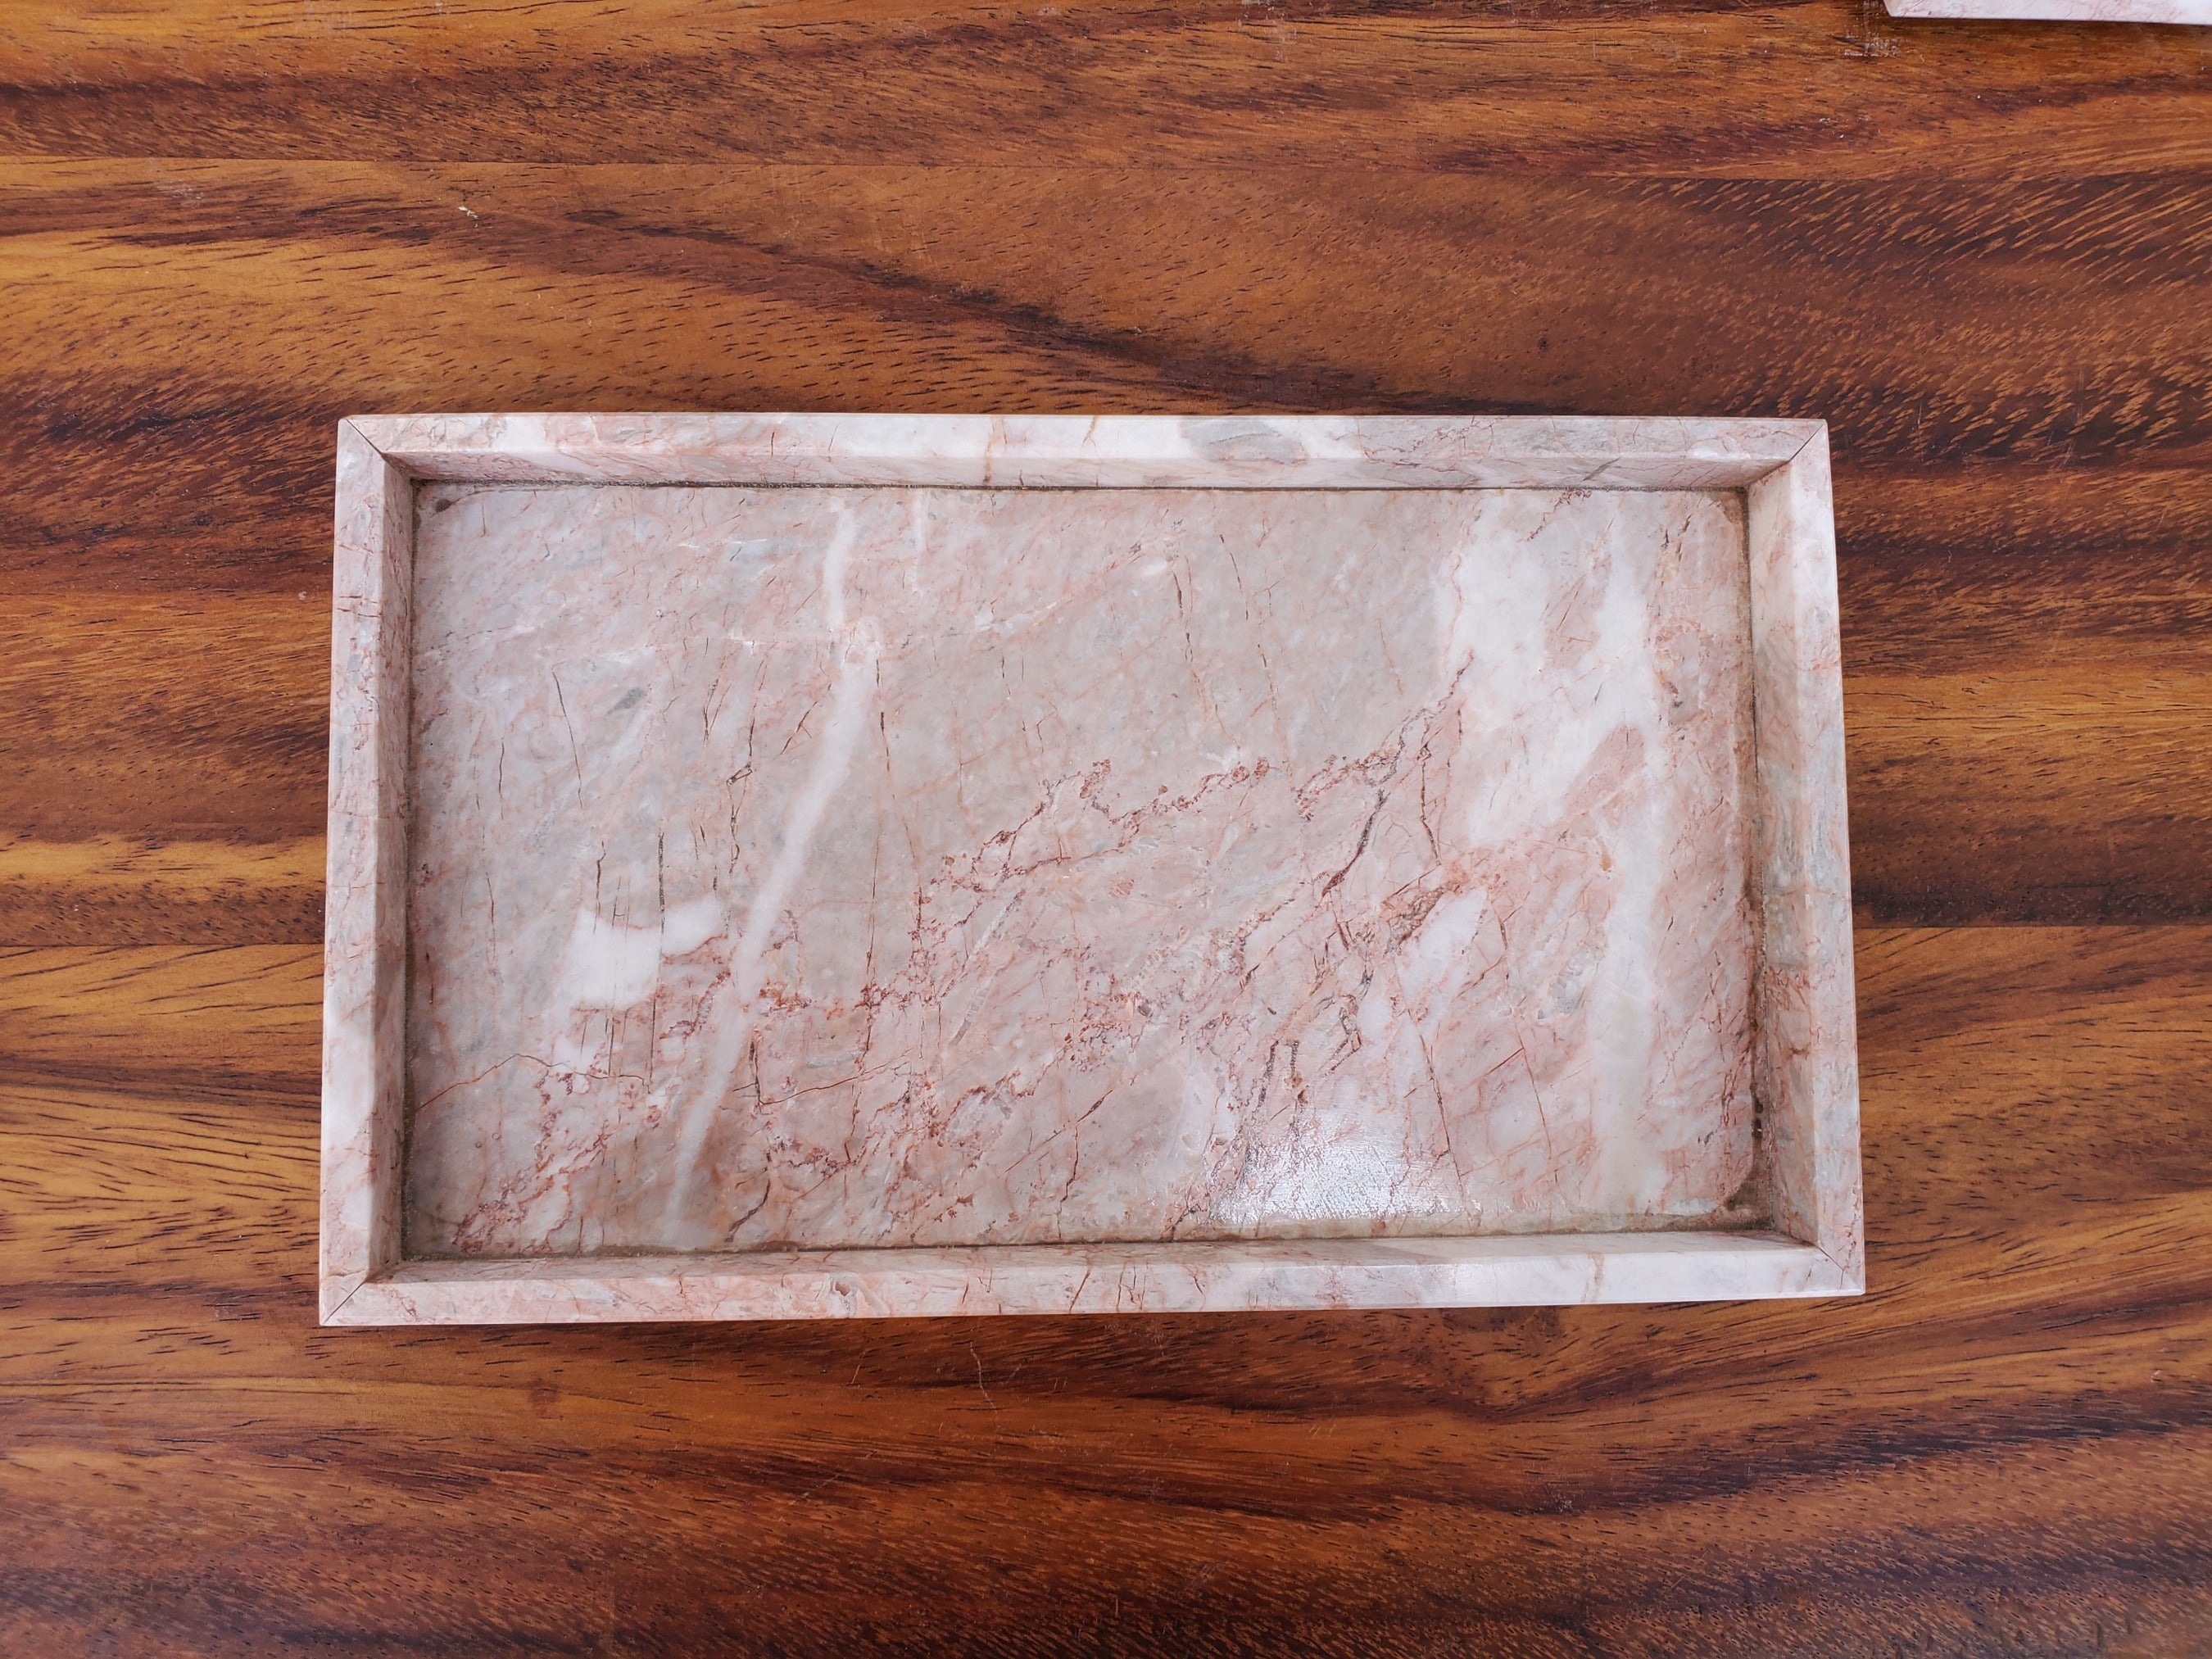 Rose Pink Marble Tray with White Veining. Each tray is one of a kind. Handmade in Mexico. Ships from the USA. Buy now at www.felipeandgrace.com.